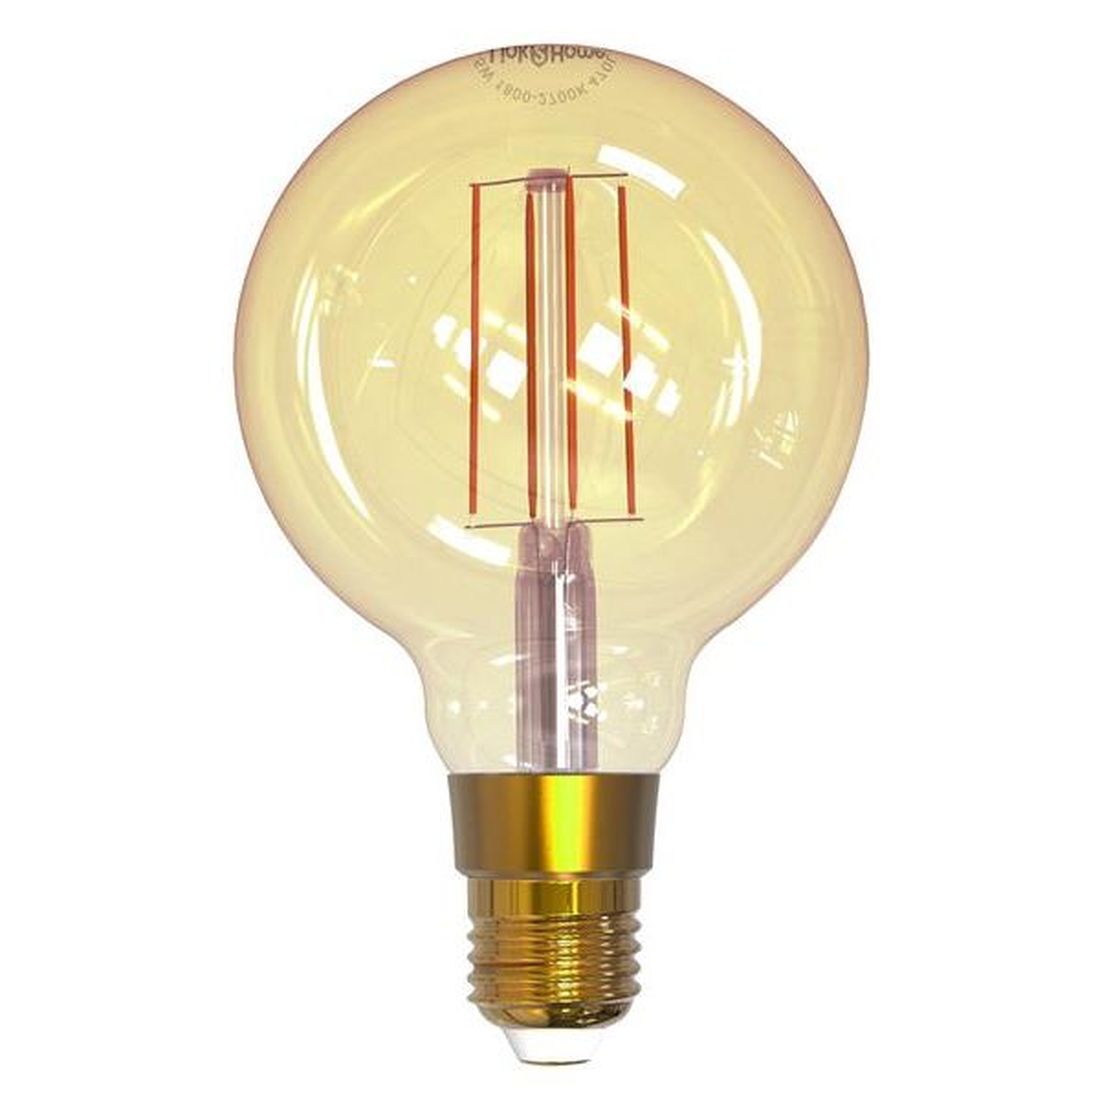 Link2Home Wi-Fi LED ES (E27) Balloon Filament Dimmable Bulb, White 470 lm 5.5W            